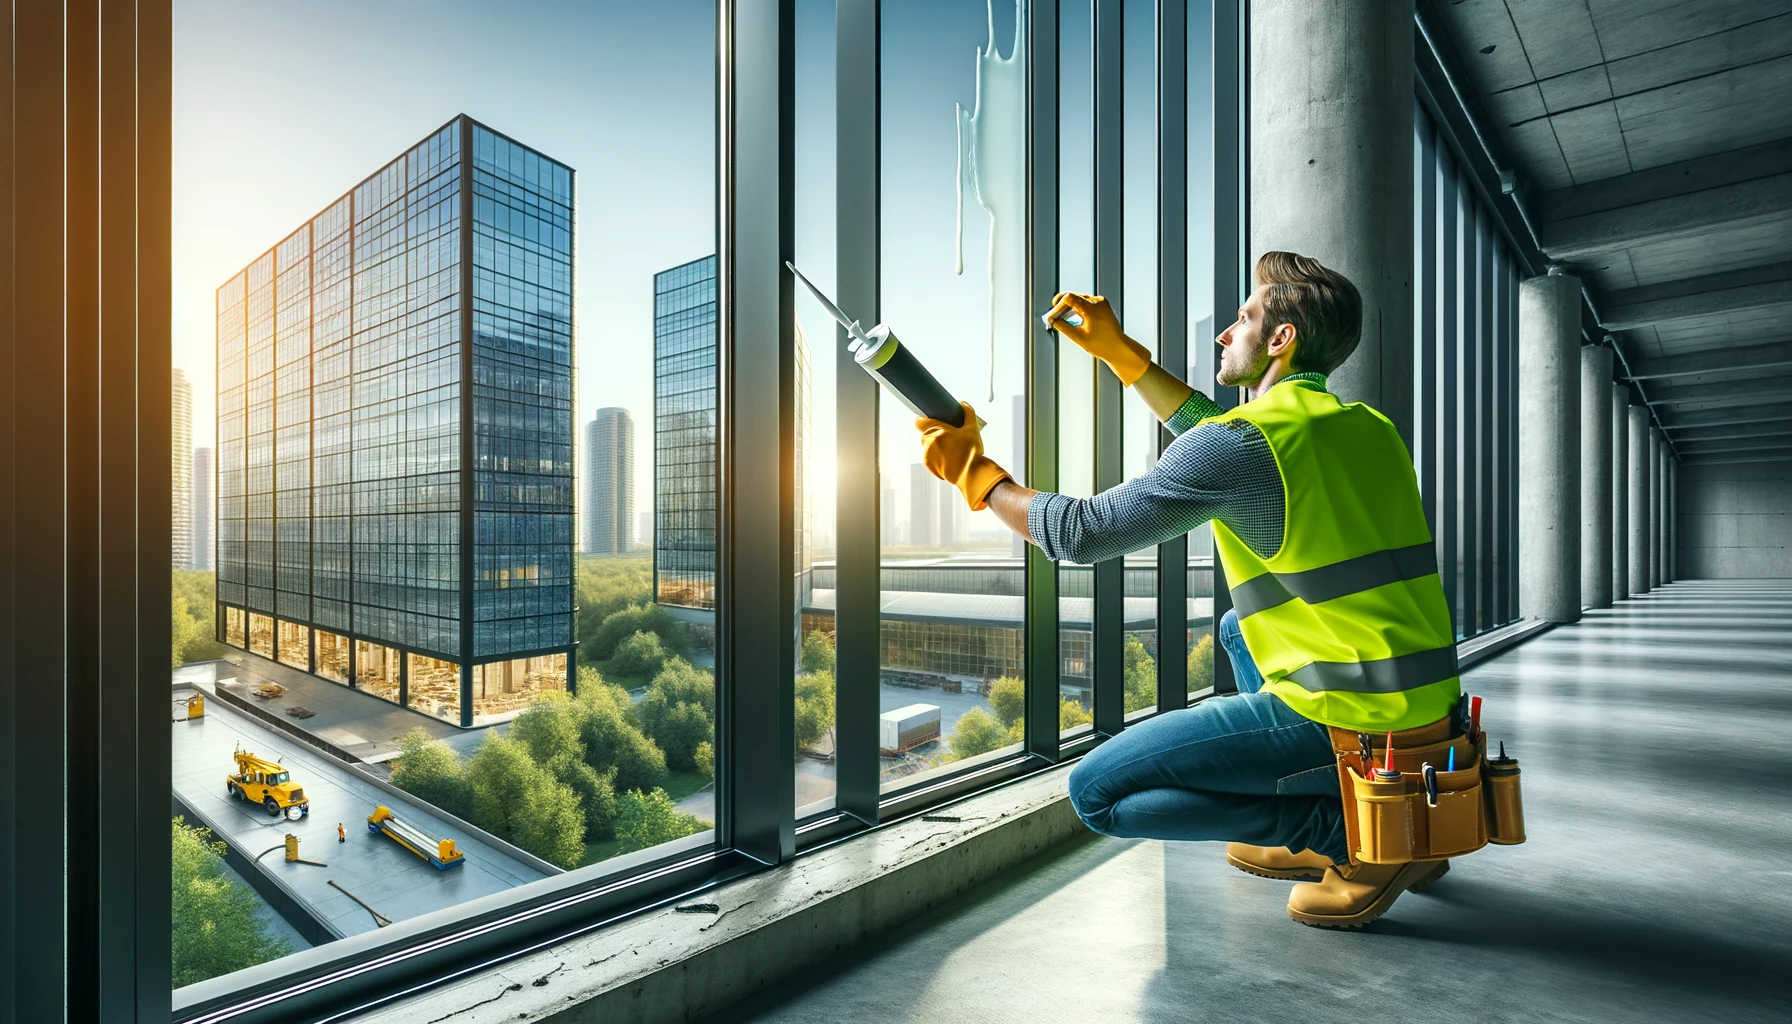 An image showing a man dressed in a high-visibility vest working in a large commercial building. He is providing professional caulking services on windows